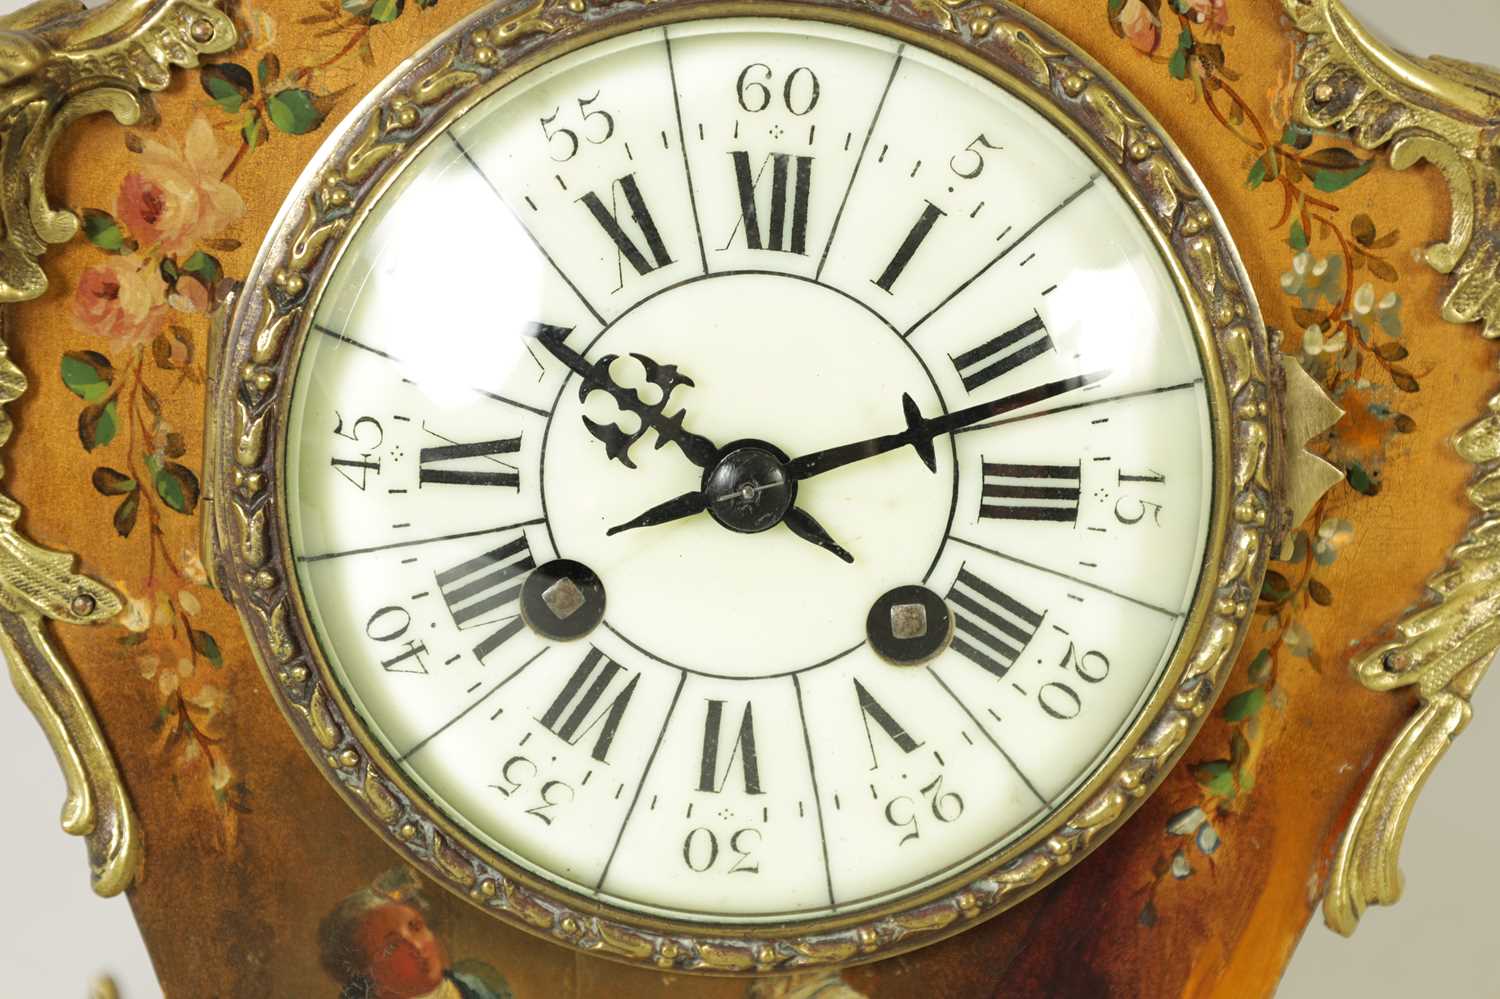 A LATE 19TH CENTURY FRENCH ORMOLU MOUNTED 'VERNIS MARTIN' MANTEL CLOCK - Image 5 of 13